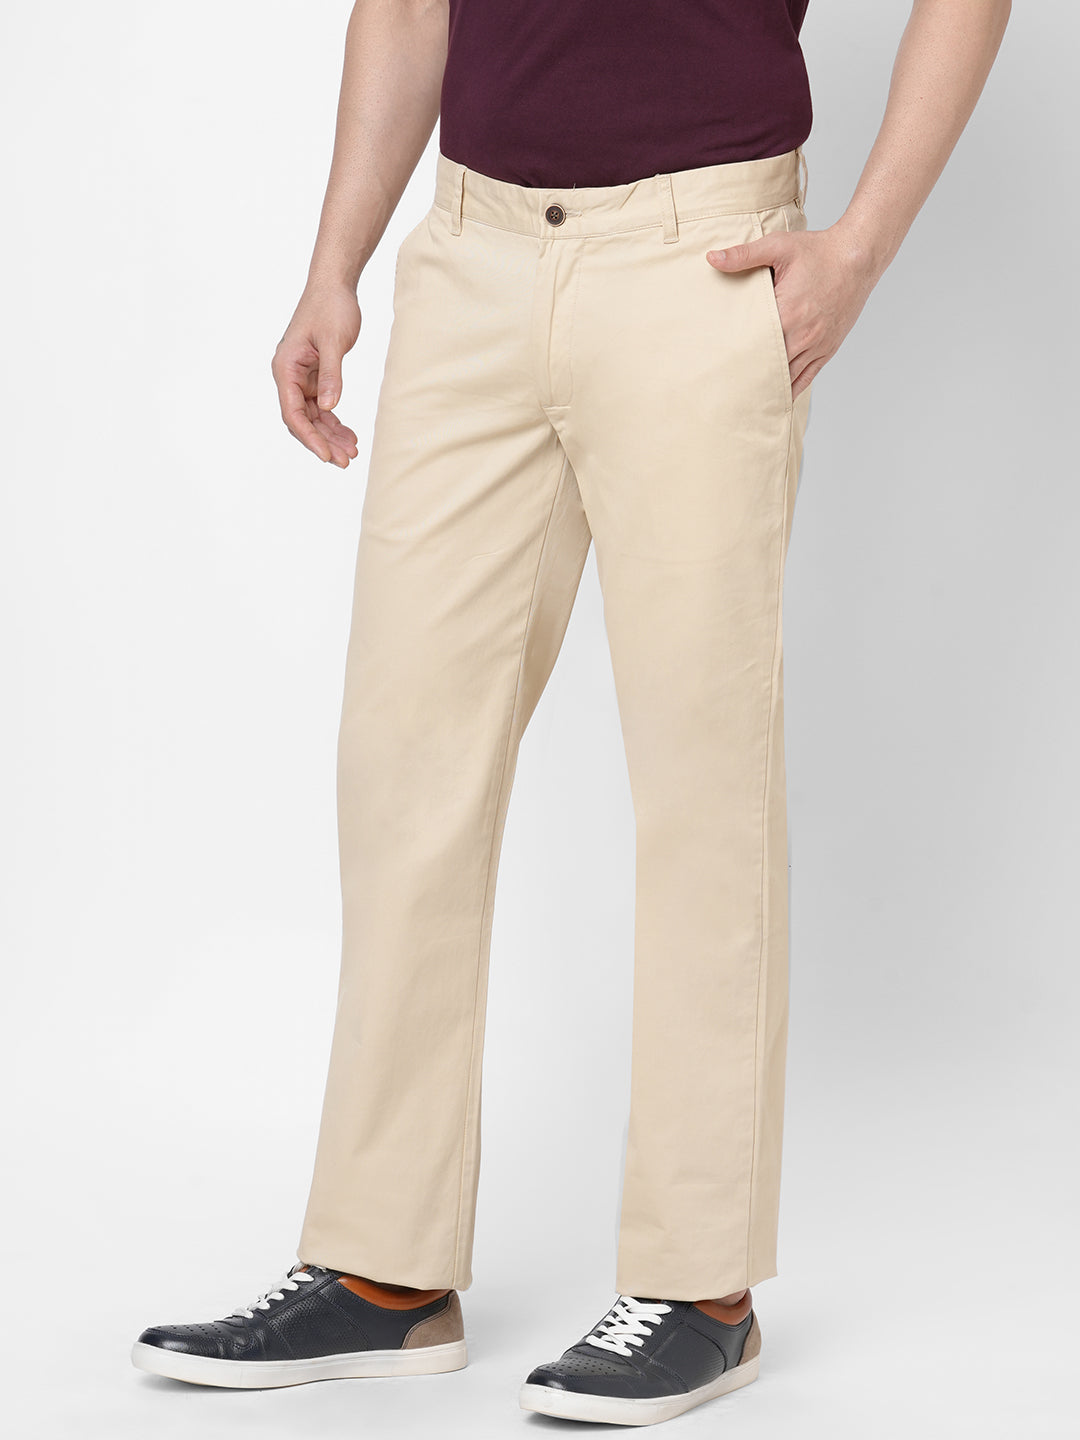 Men's Relaxed Fit Pants - Relaxed Pant Styles | Haggar